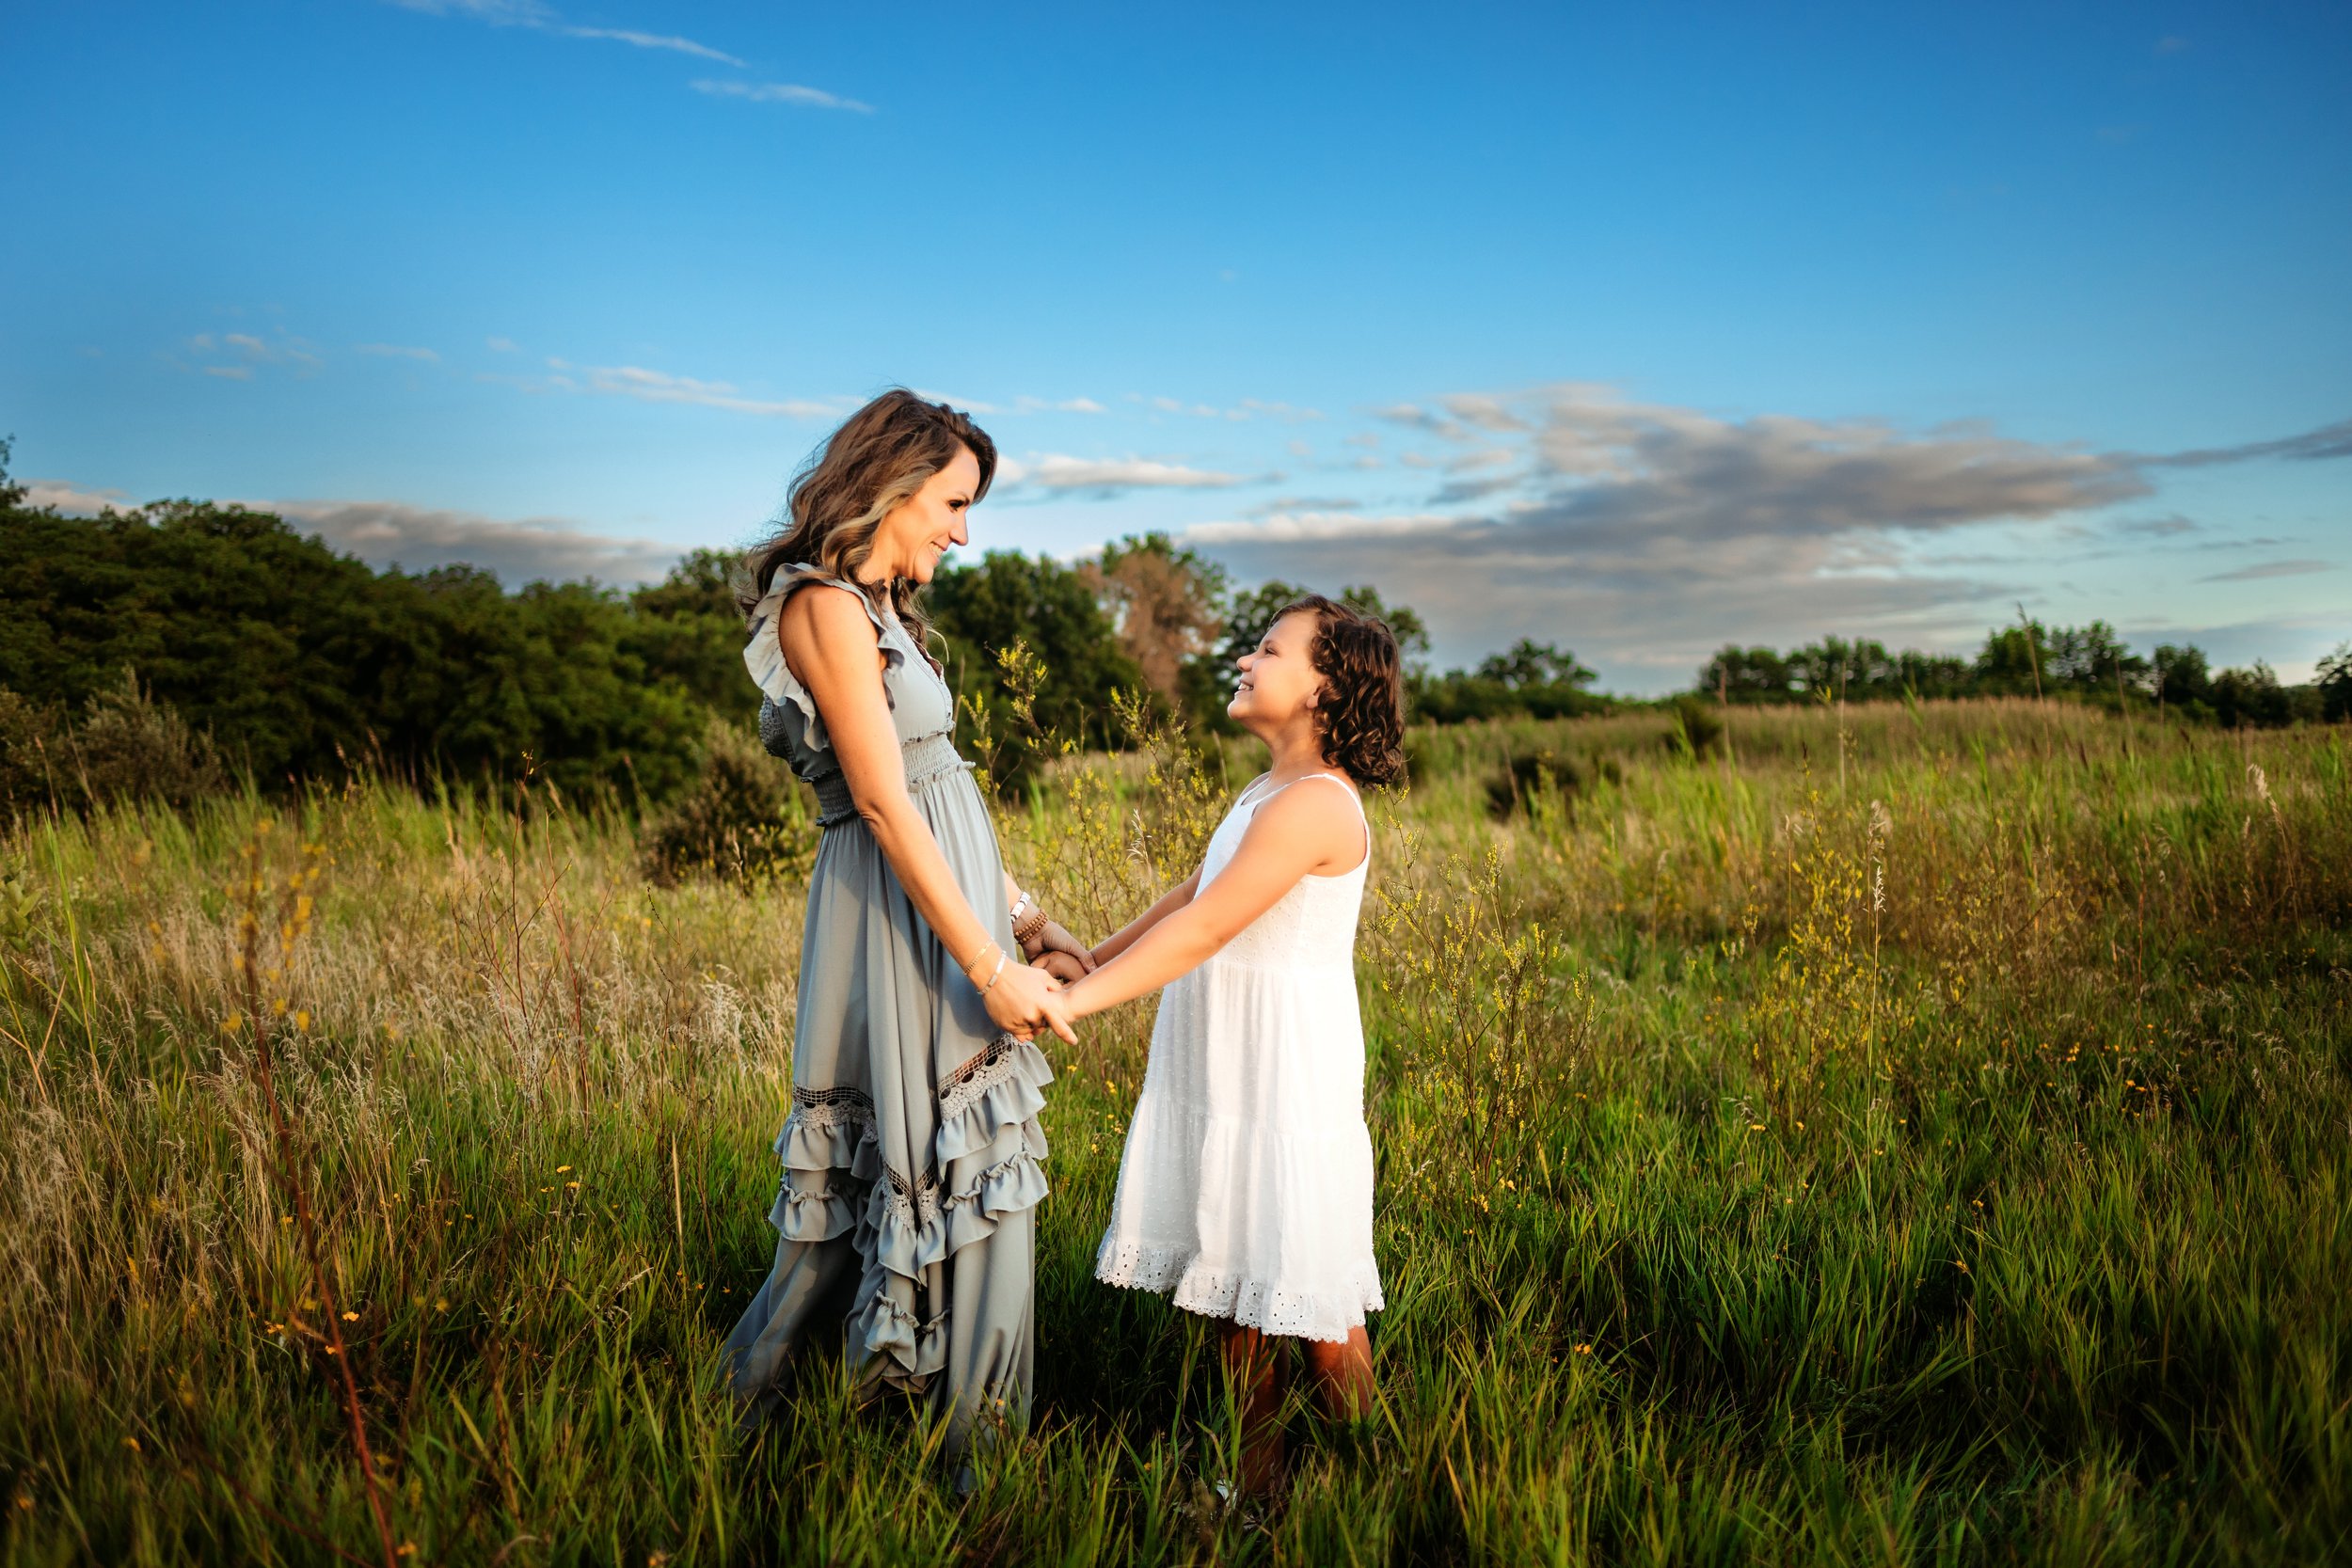  An Illinois family photographer captures a beautiful moment between a mother and her daughter by Teala Ward Photography. motherhood pic #motherhood #mommapics #TealaWardPhotography #TealaWardFamilies #IllinoisPhotographers #IllinoisFamilyPhotography